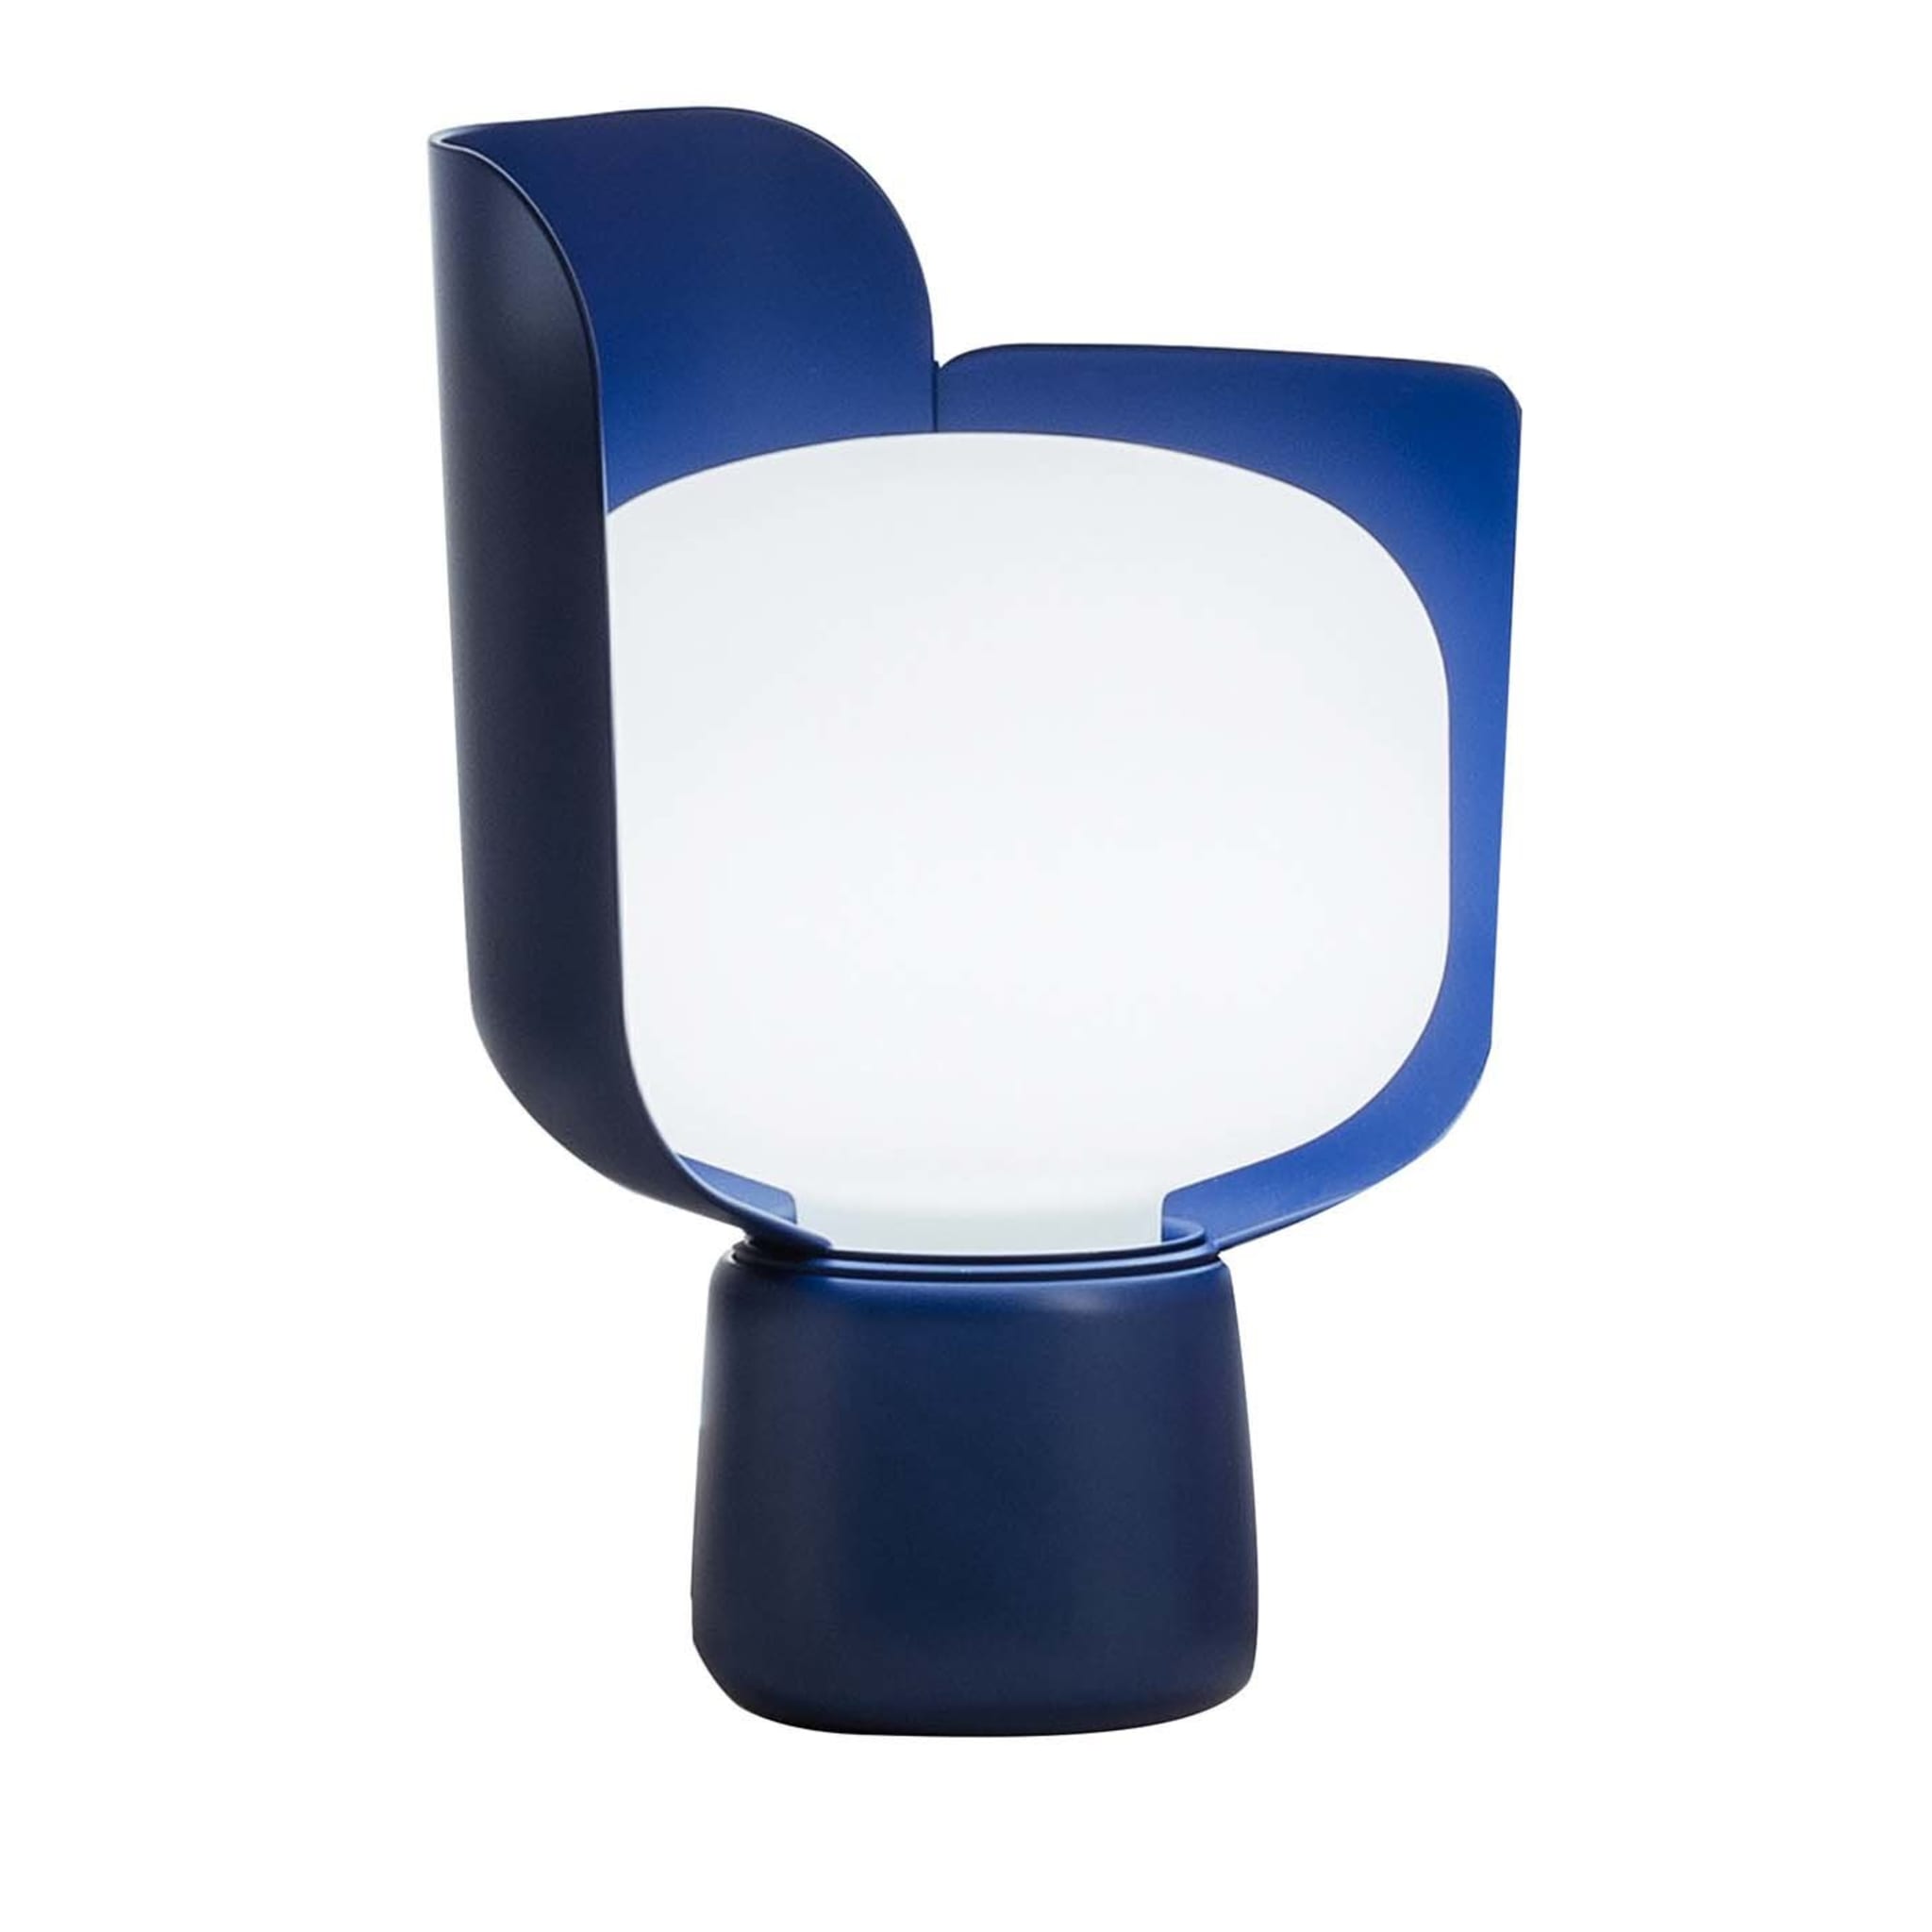 Blom Blue Table Lamp by Andreas Engesvik - Main view